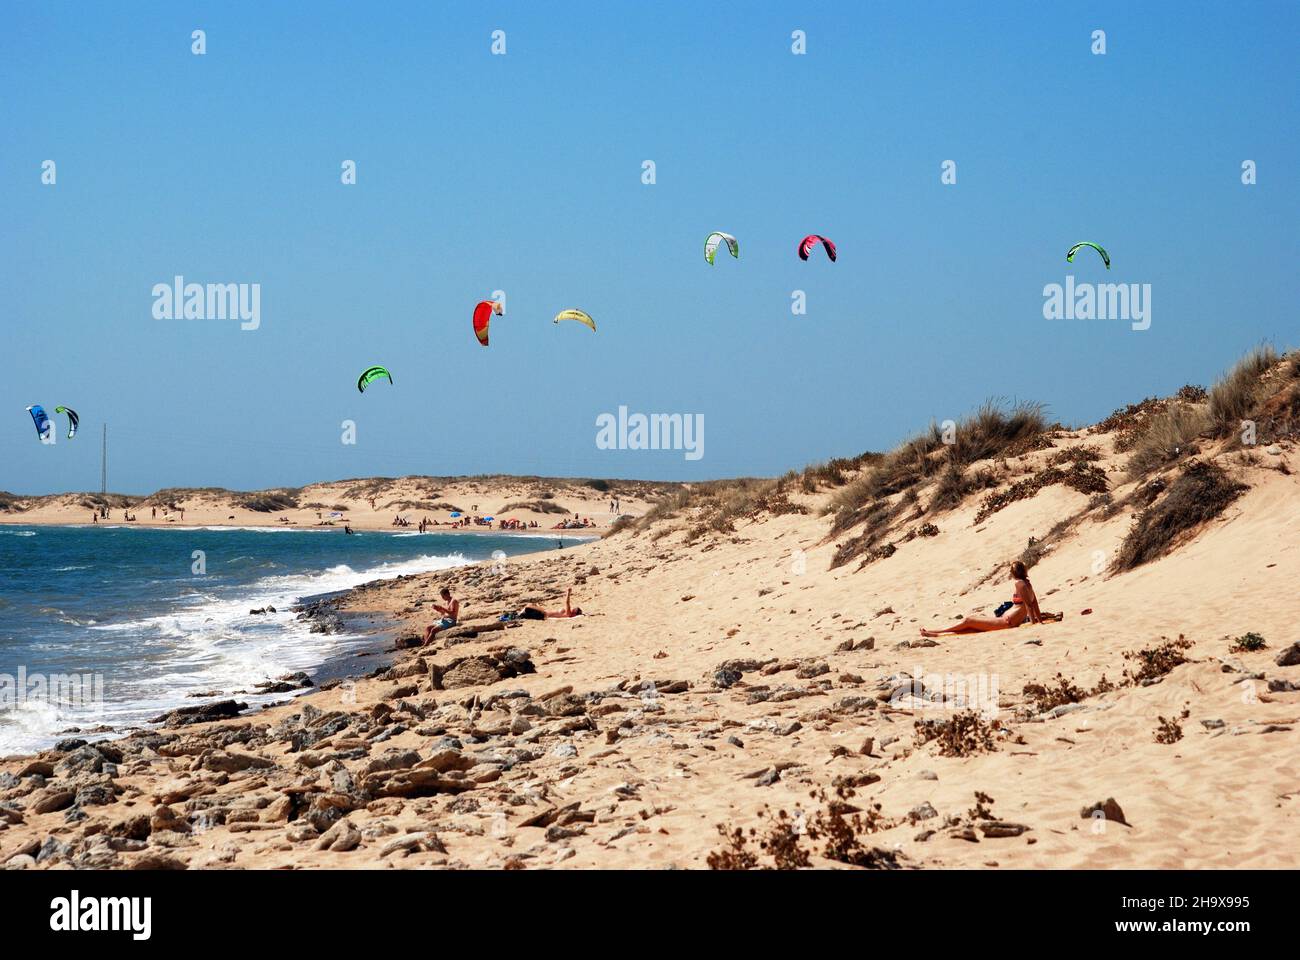 Tourists relaxing on the beach with kitesurfers to the rear, Cabo Trafalgar, Cadiz Province, Andalusia, Spain. Stock Photo